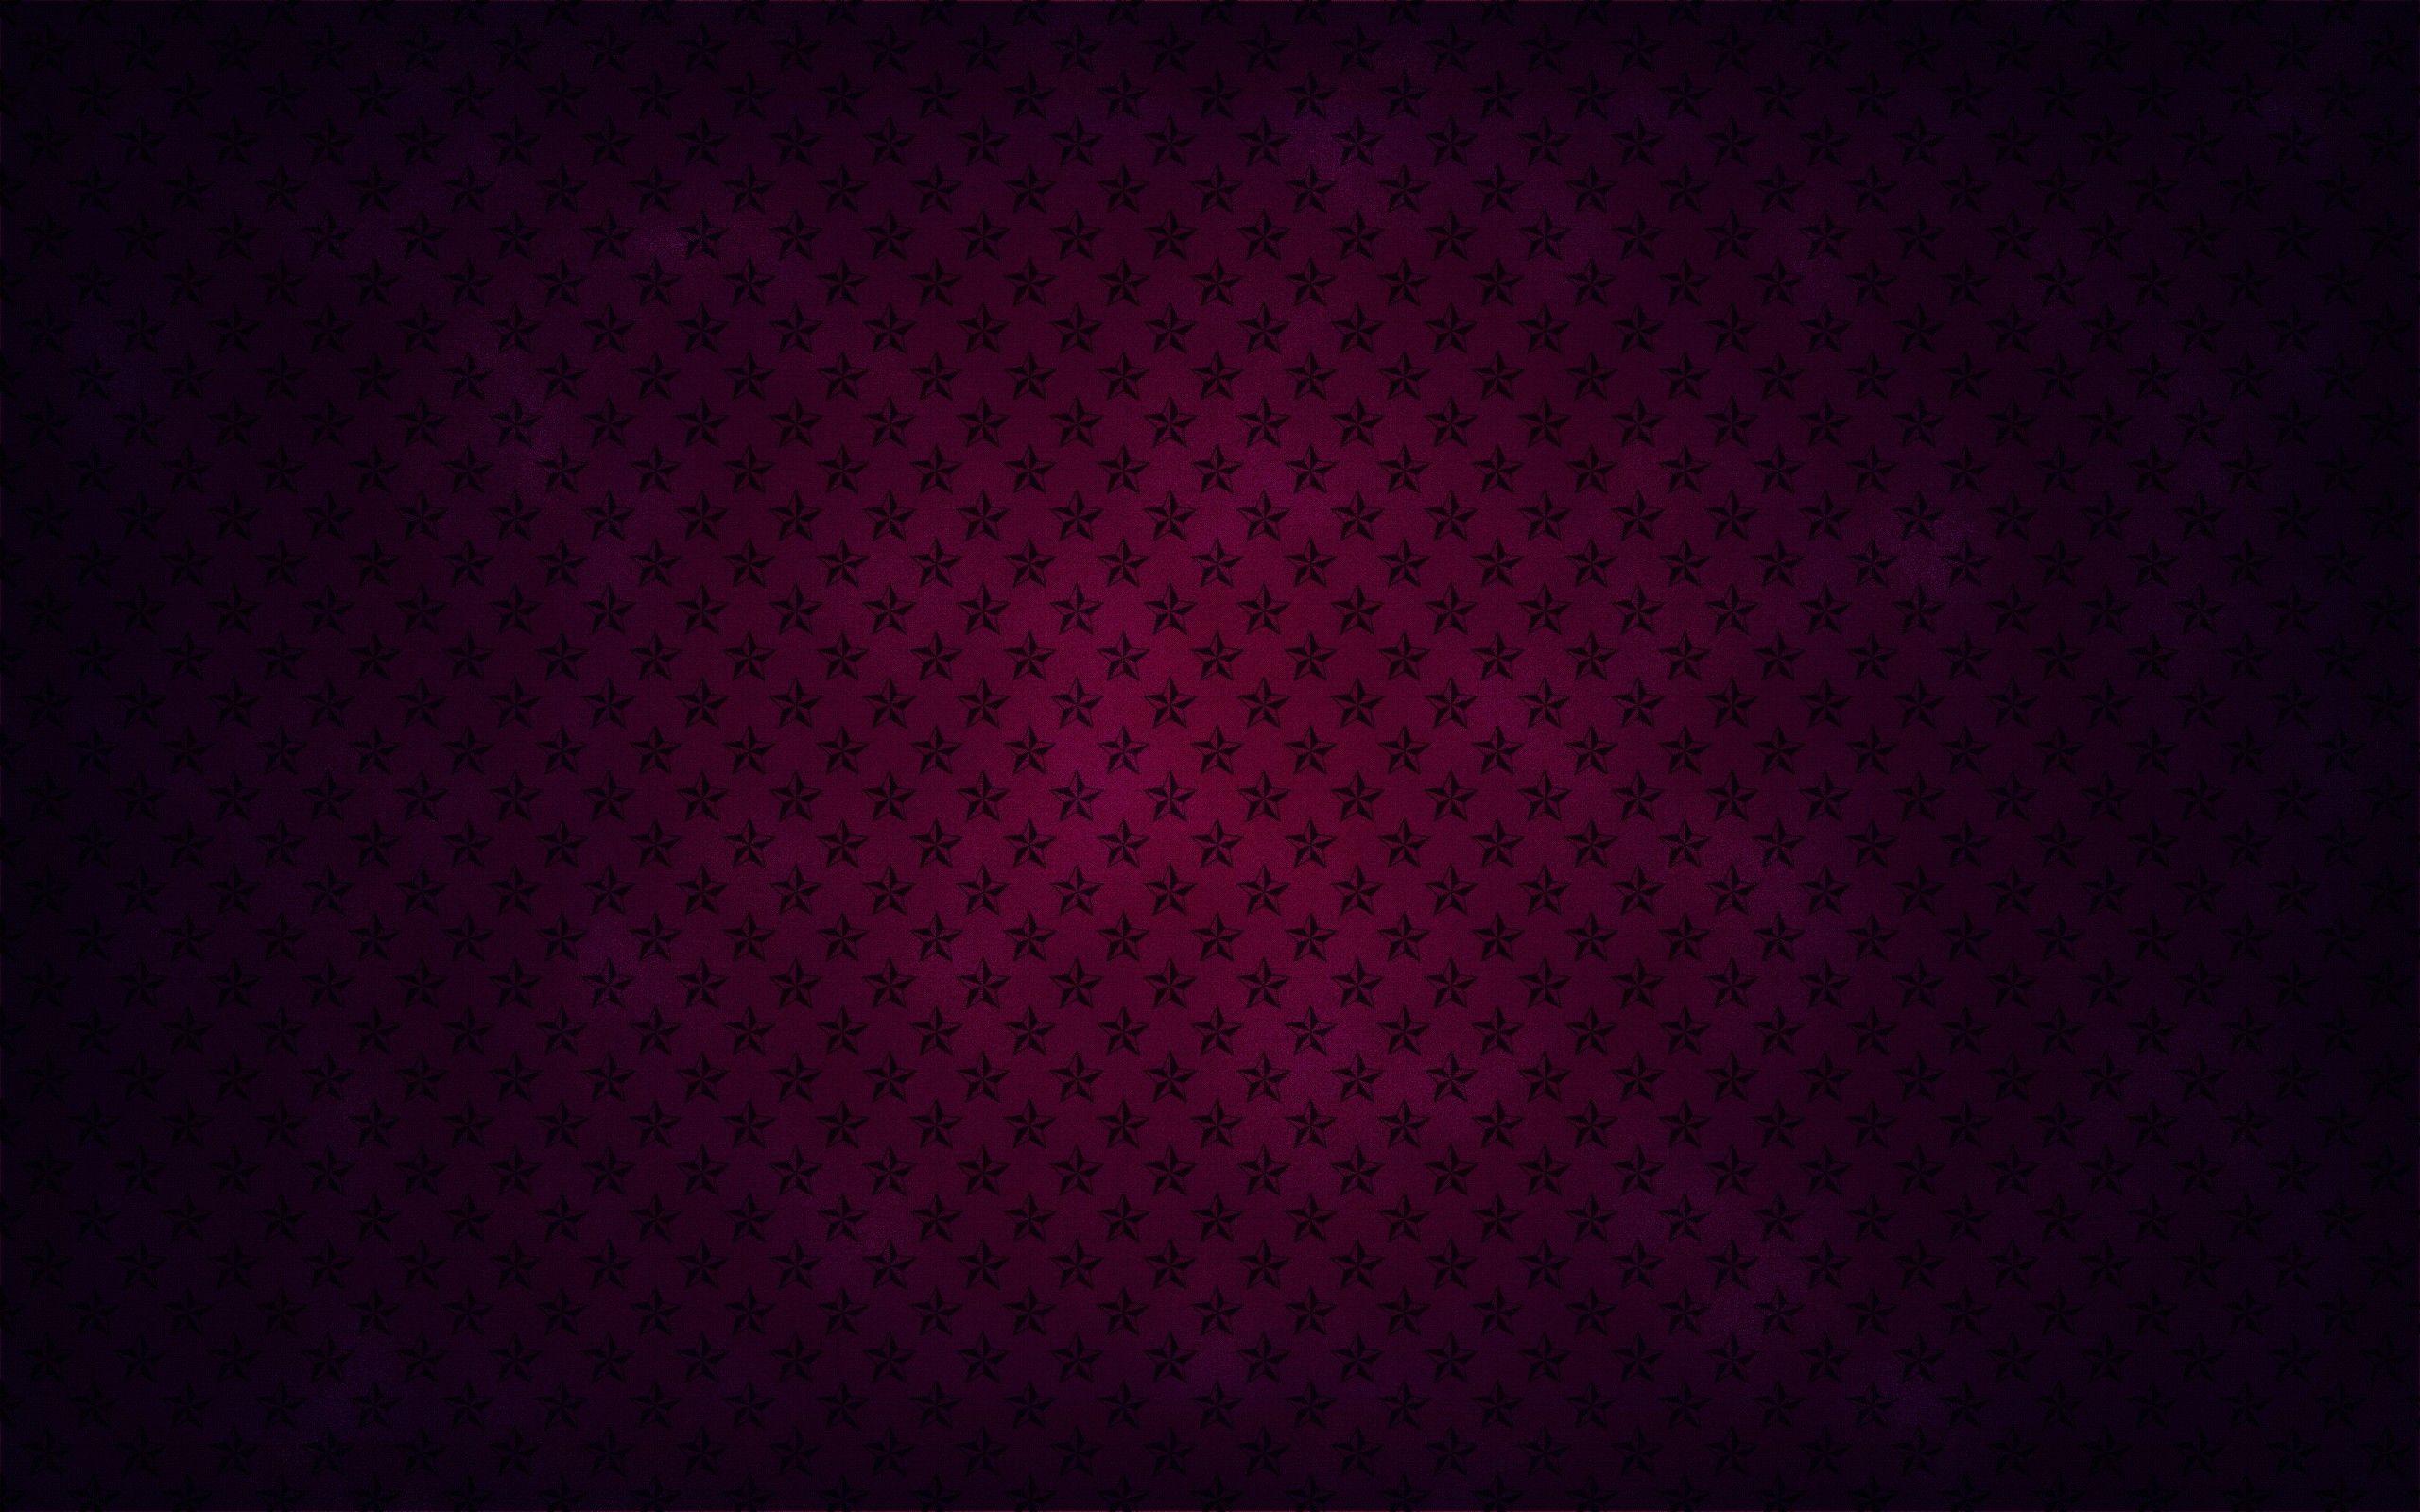 Pink and Black backgroundDownload free beautiful HD background